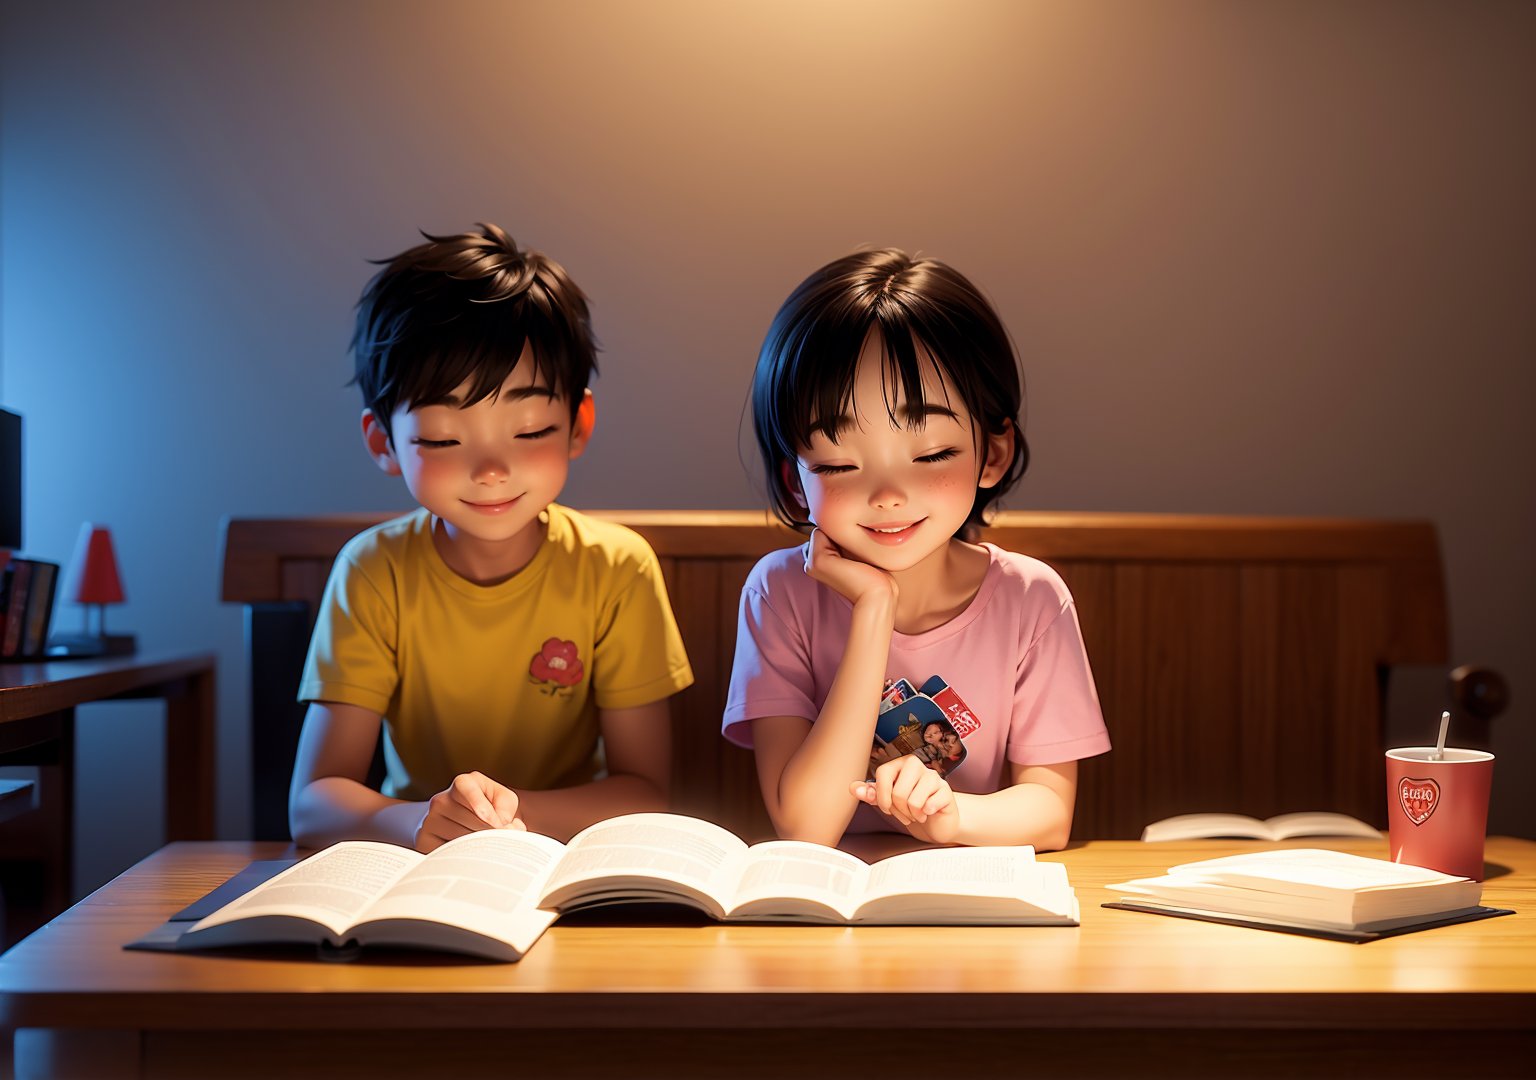 a girl and a boy reading a book on table before sleep, bright smile, room background, 3d cartoon render, perfect hands, no hands